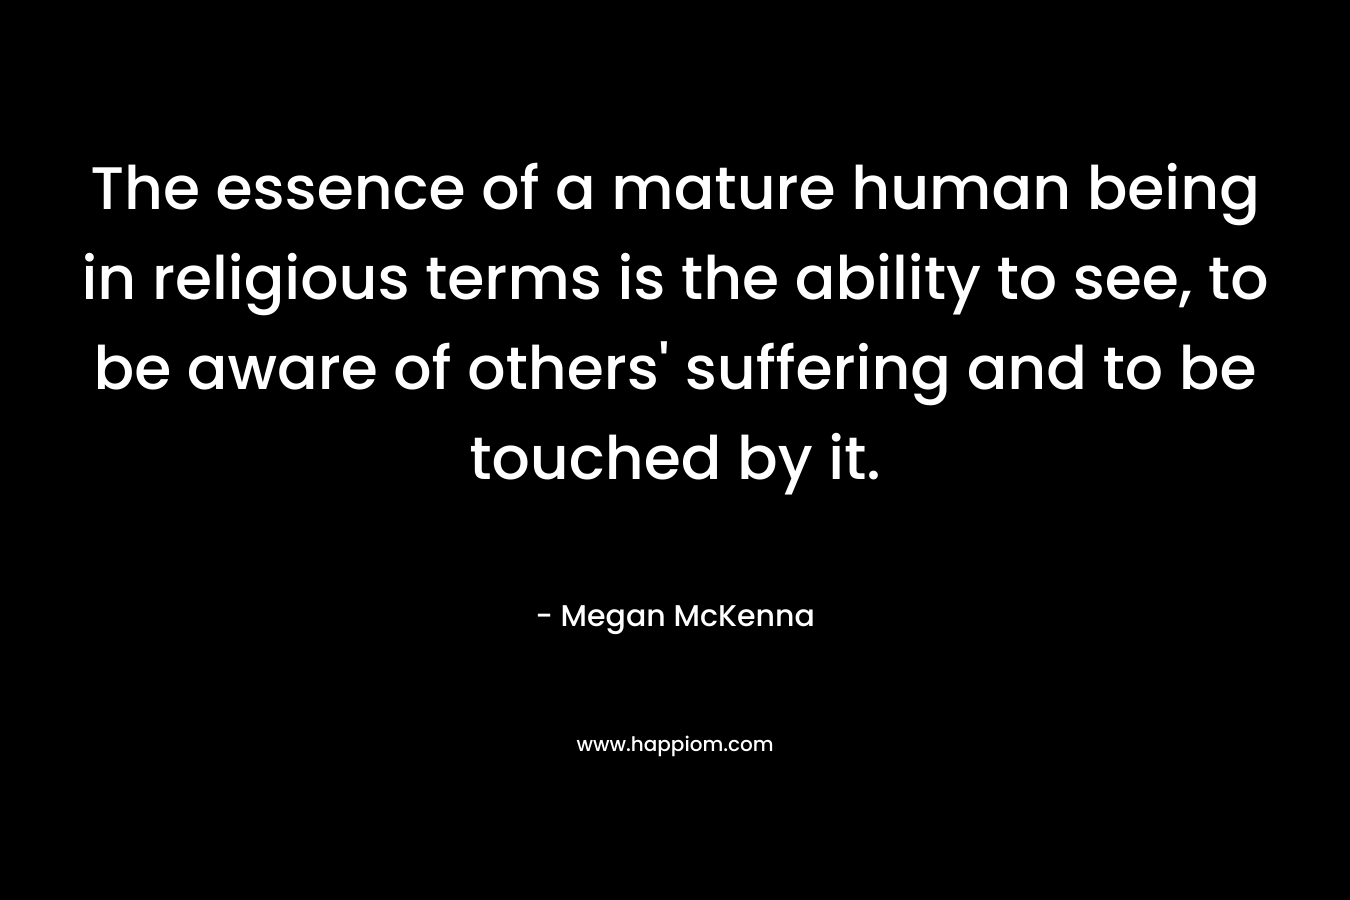 The essence of a mature human being in religious terms is the ability to see, to be aware of others' suffering and to be touched by it.